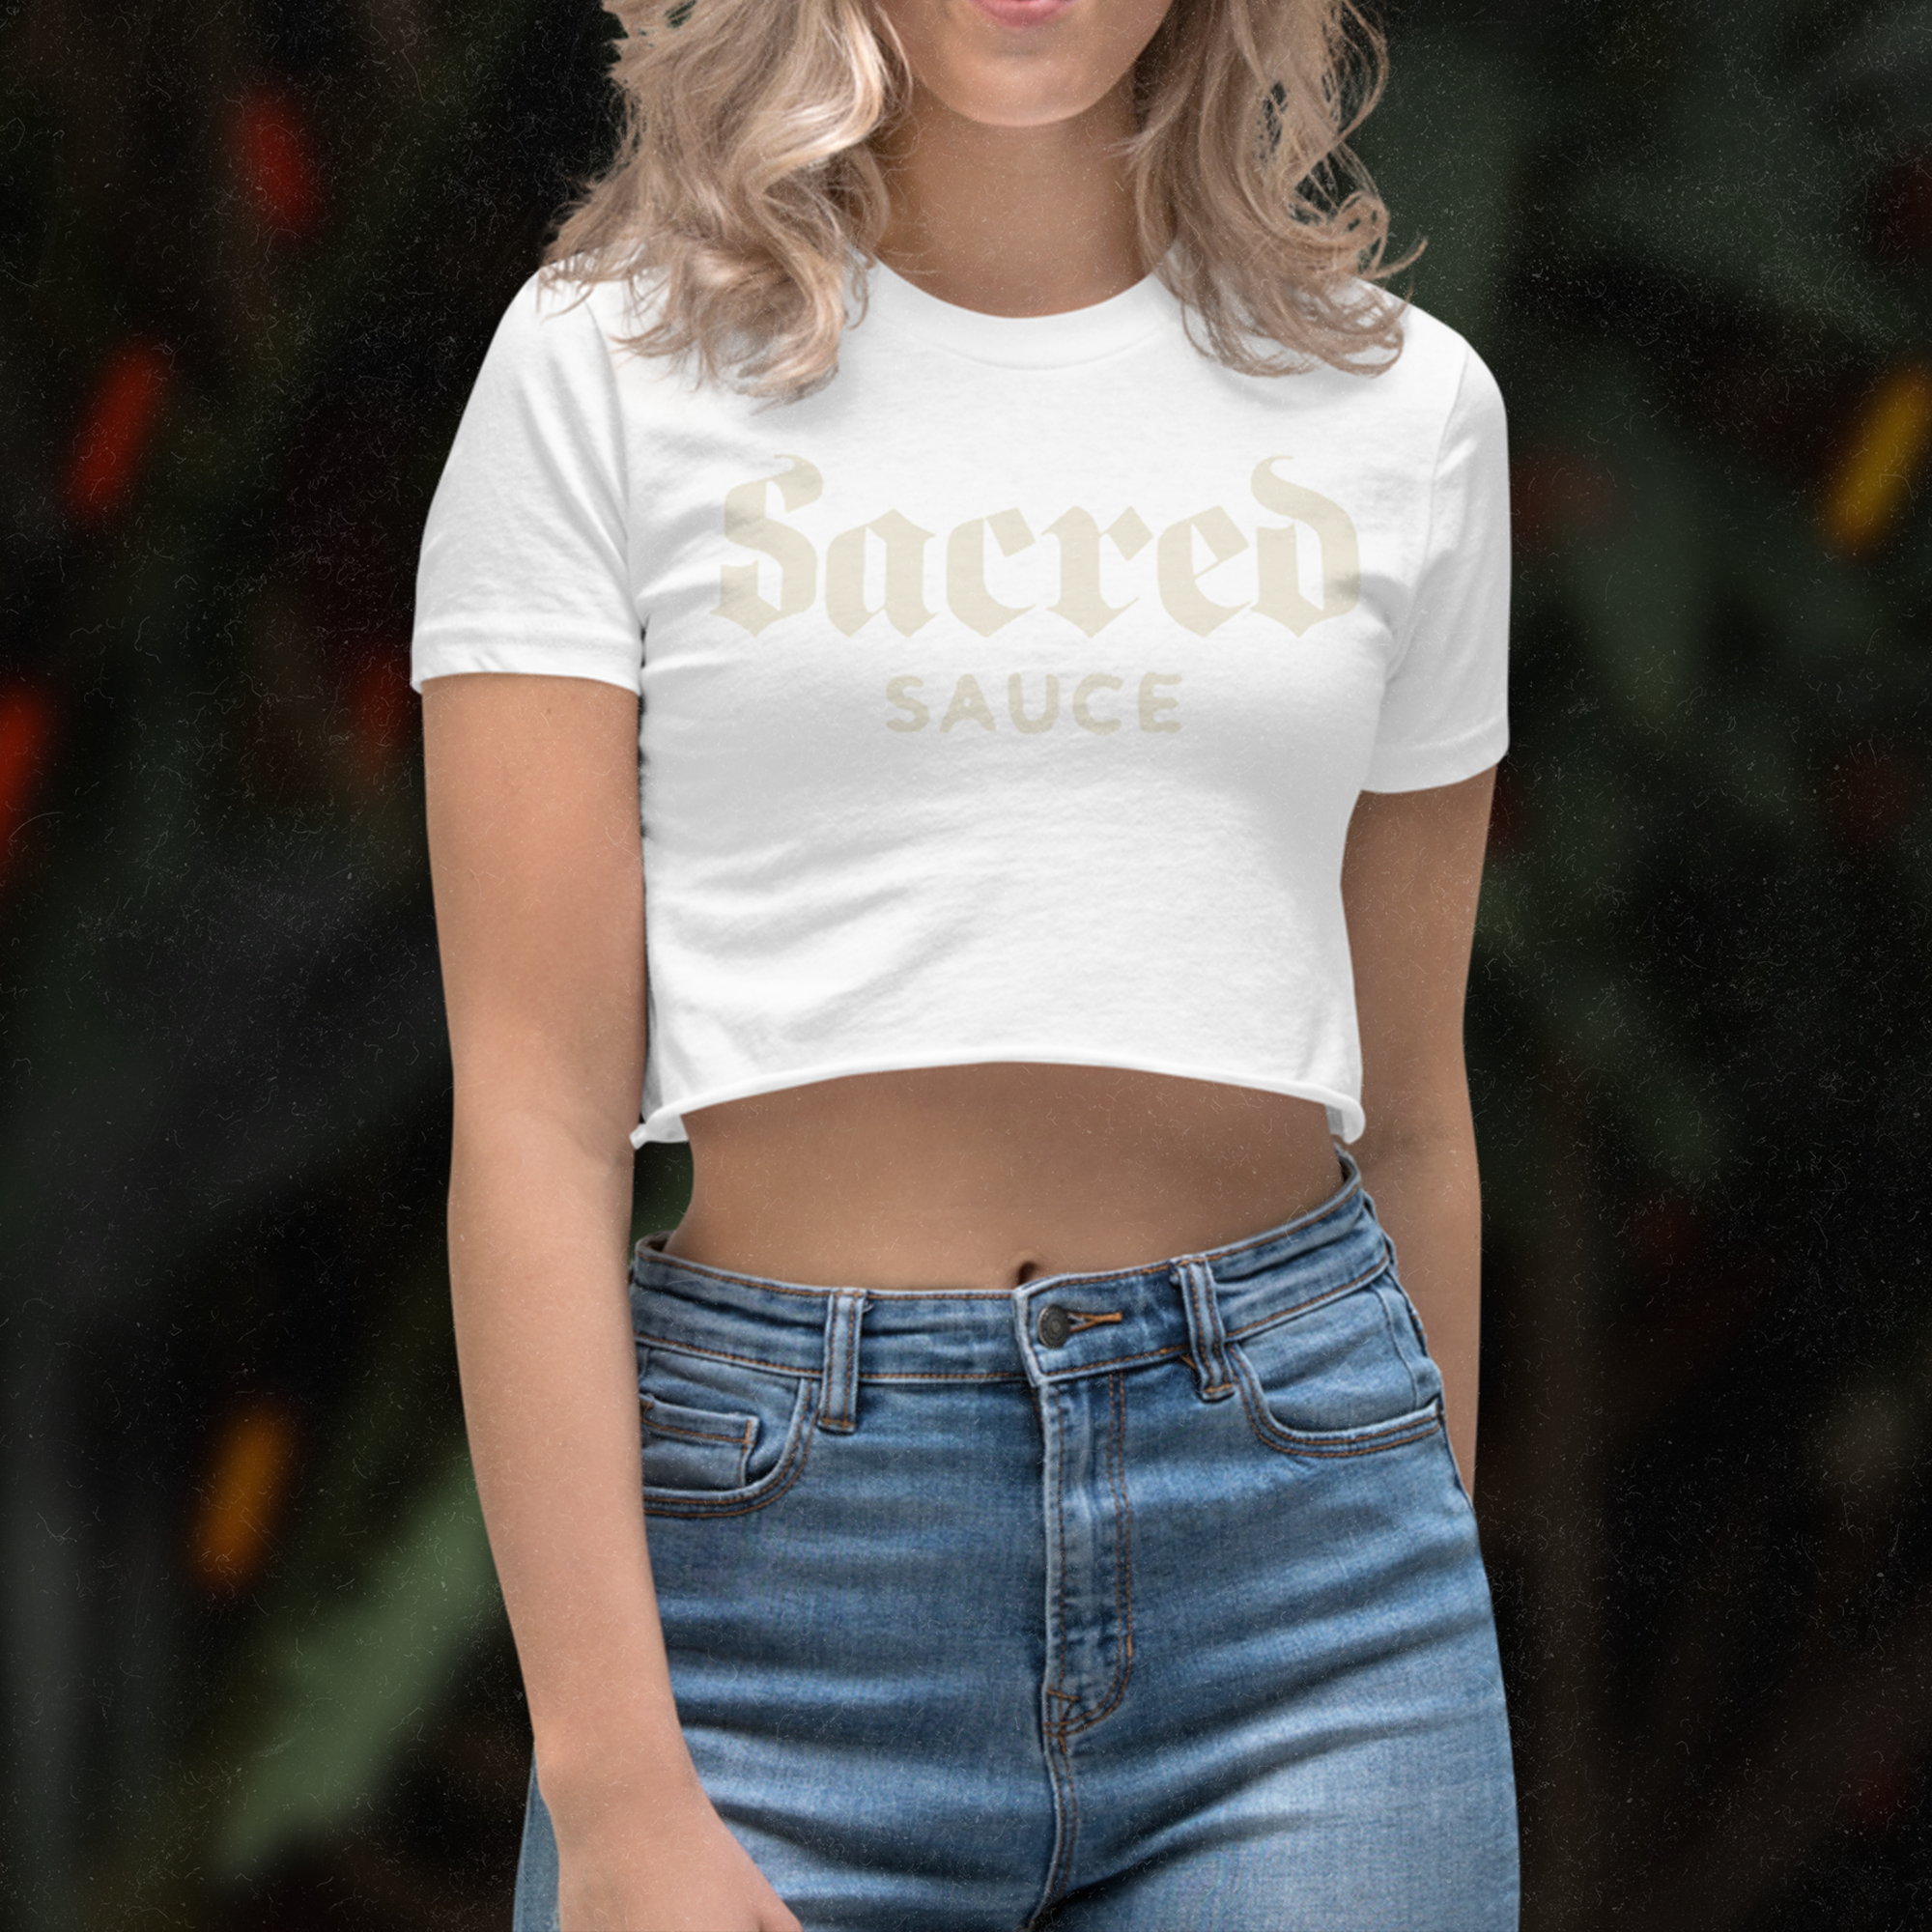 Fiercely Natural Women's Crop - Sacred Sauce